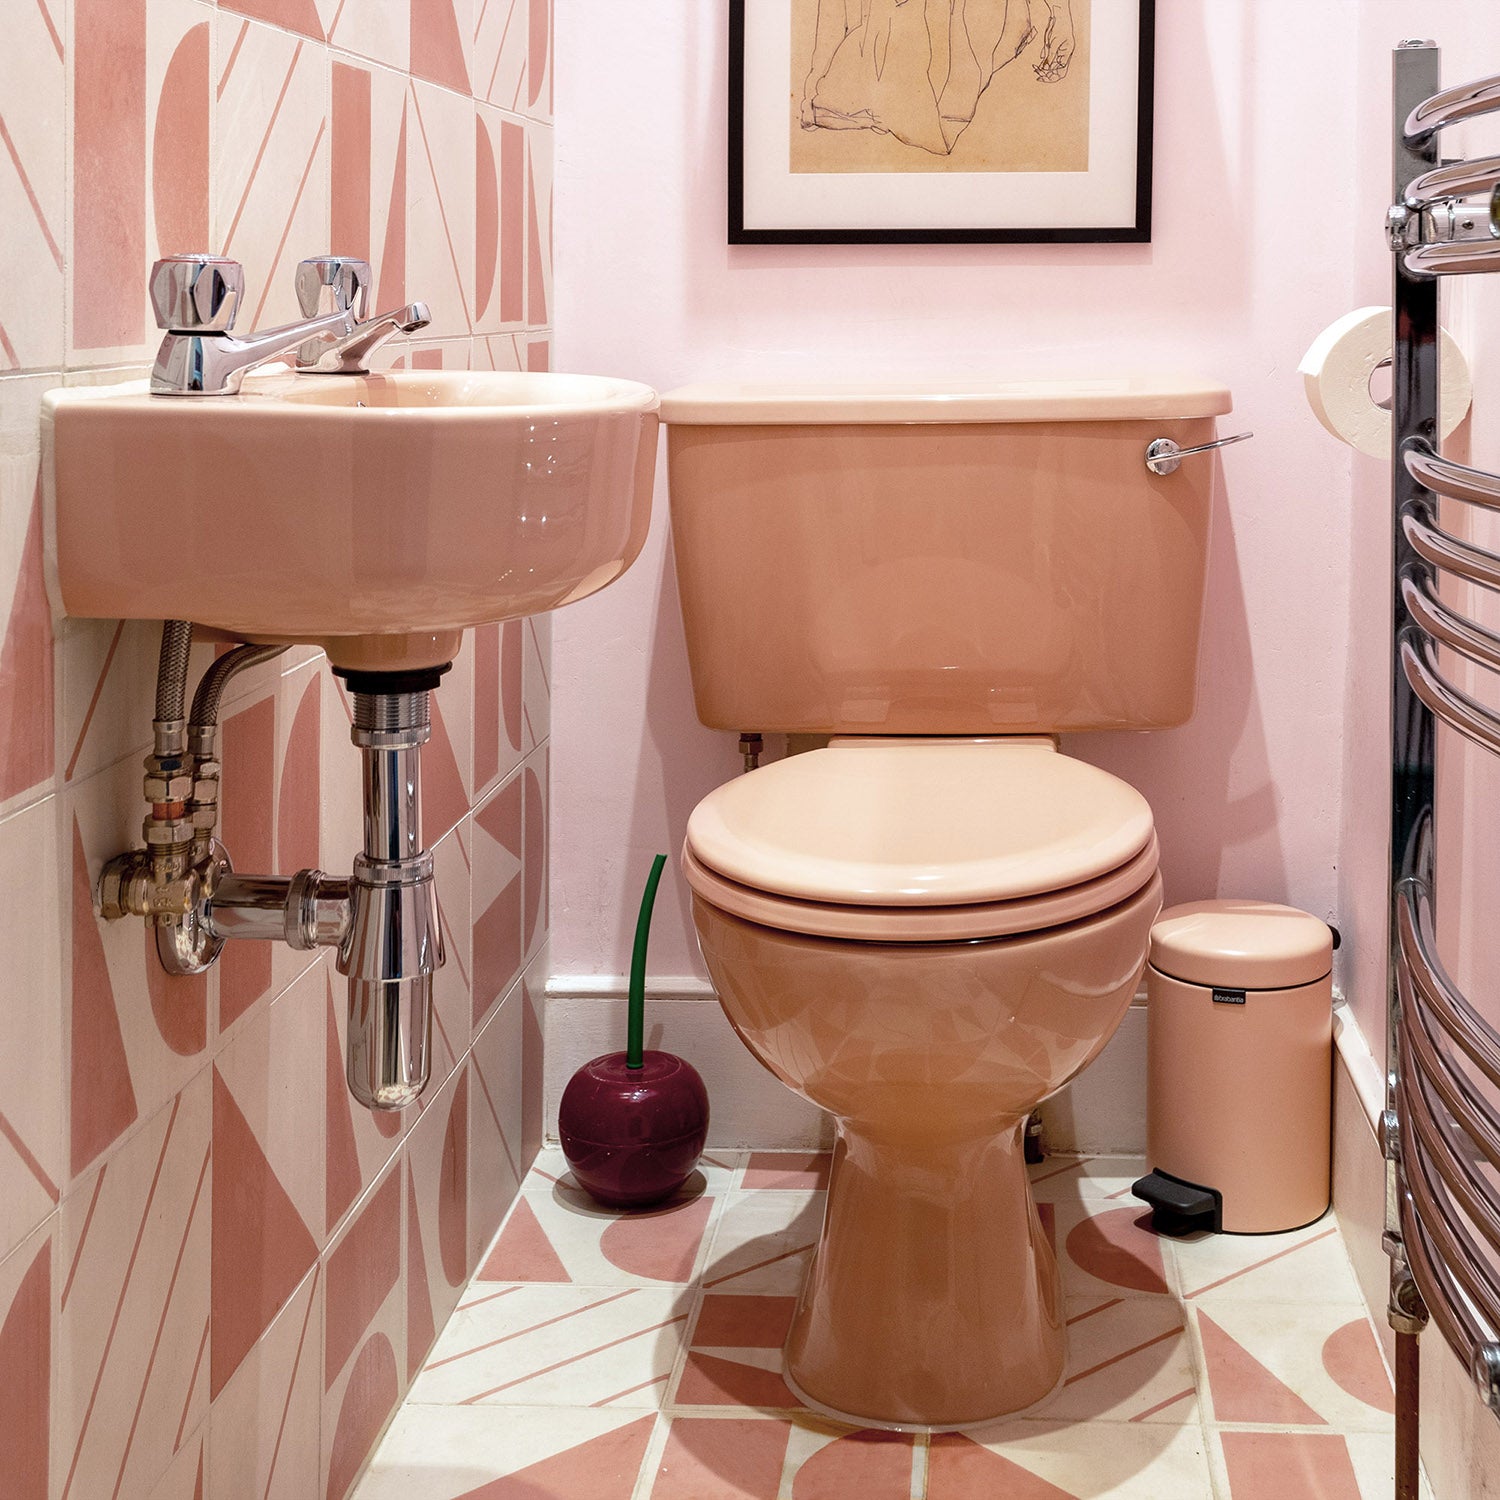 Retro cloakroom set Coral Pink, toilet, sink basin, taps, funky tiles, The Bold Bathroom Company 